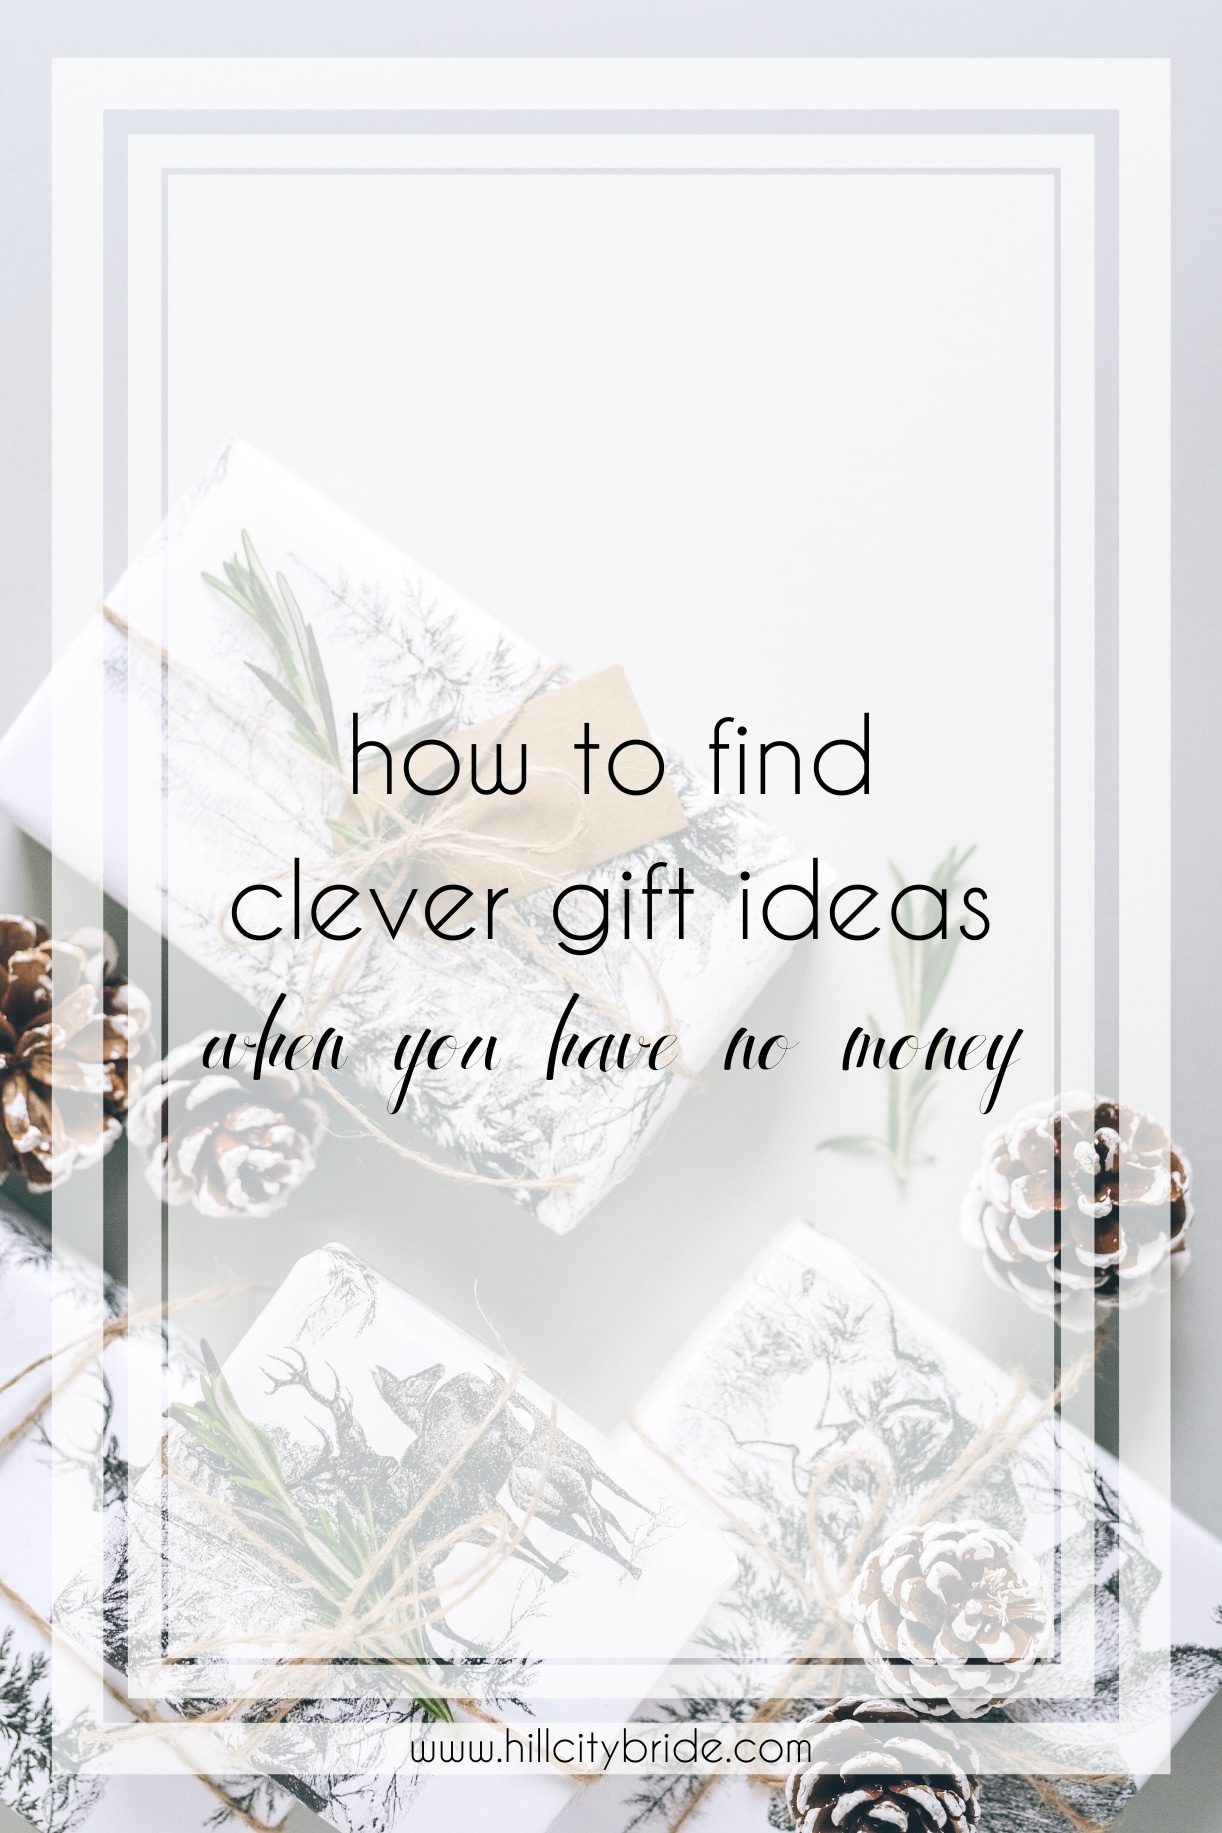 How to Come up With Clever Gift Ideas When You Have No Money